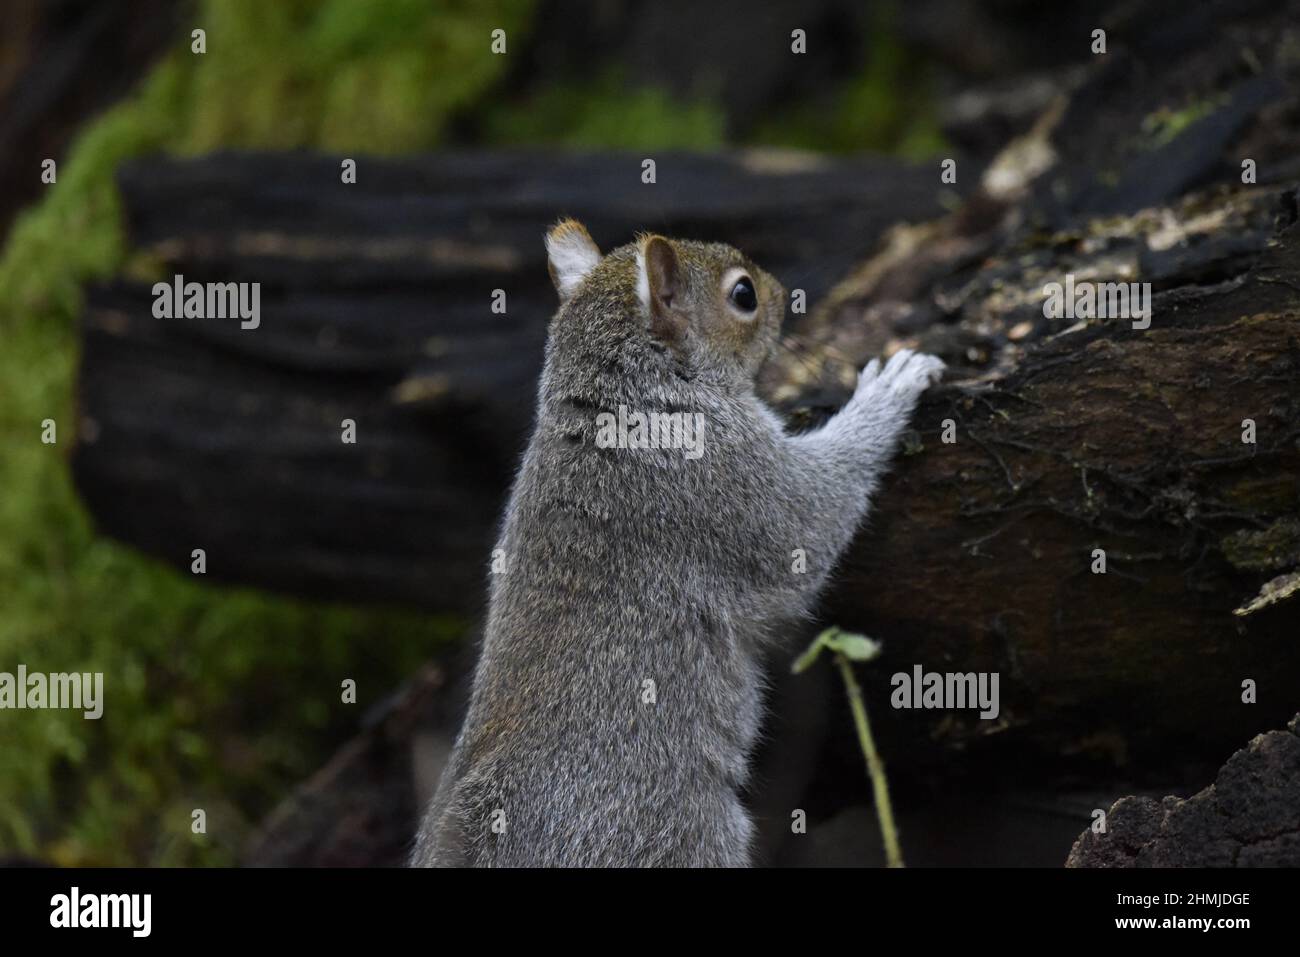 Head and Upper Body Close-Up Image of an Eastern Gray Squirrel (Sciurus carolinensis) Peering Over the Top of a Decayed Tree Log in UK in Winter Stock Photo